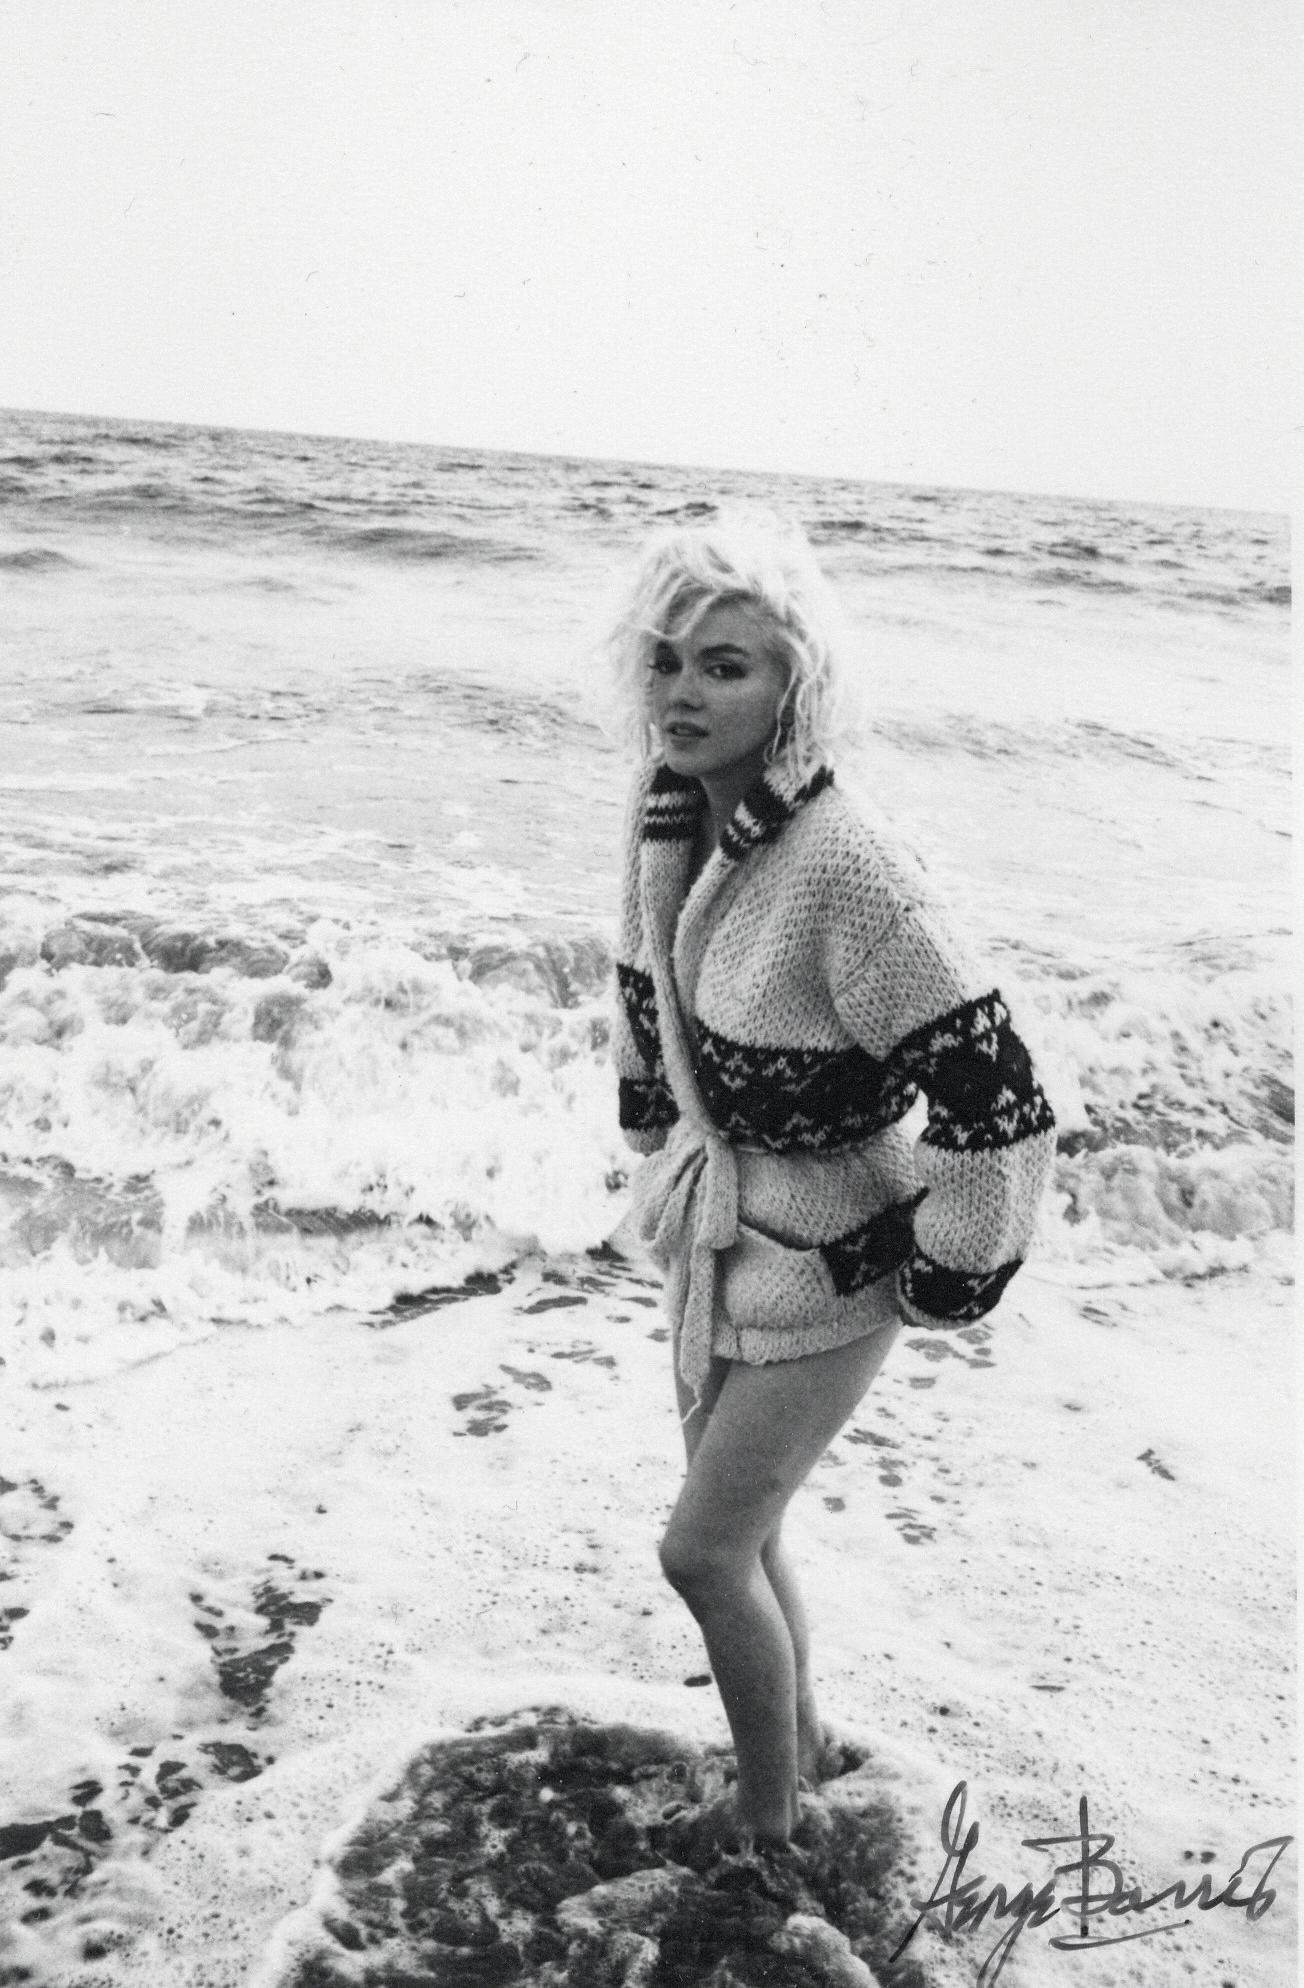 George Barris Portrait Photograph - Marilyn Monroe Posed in the Surf Vintage Original Photograph